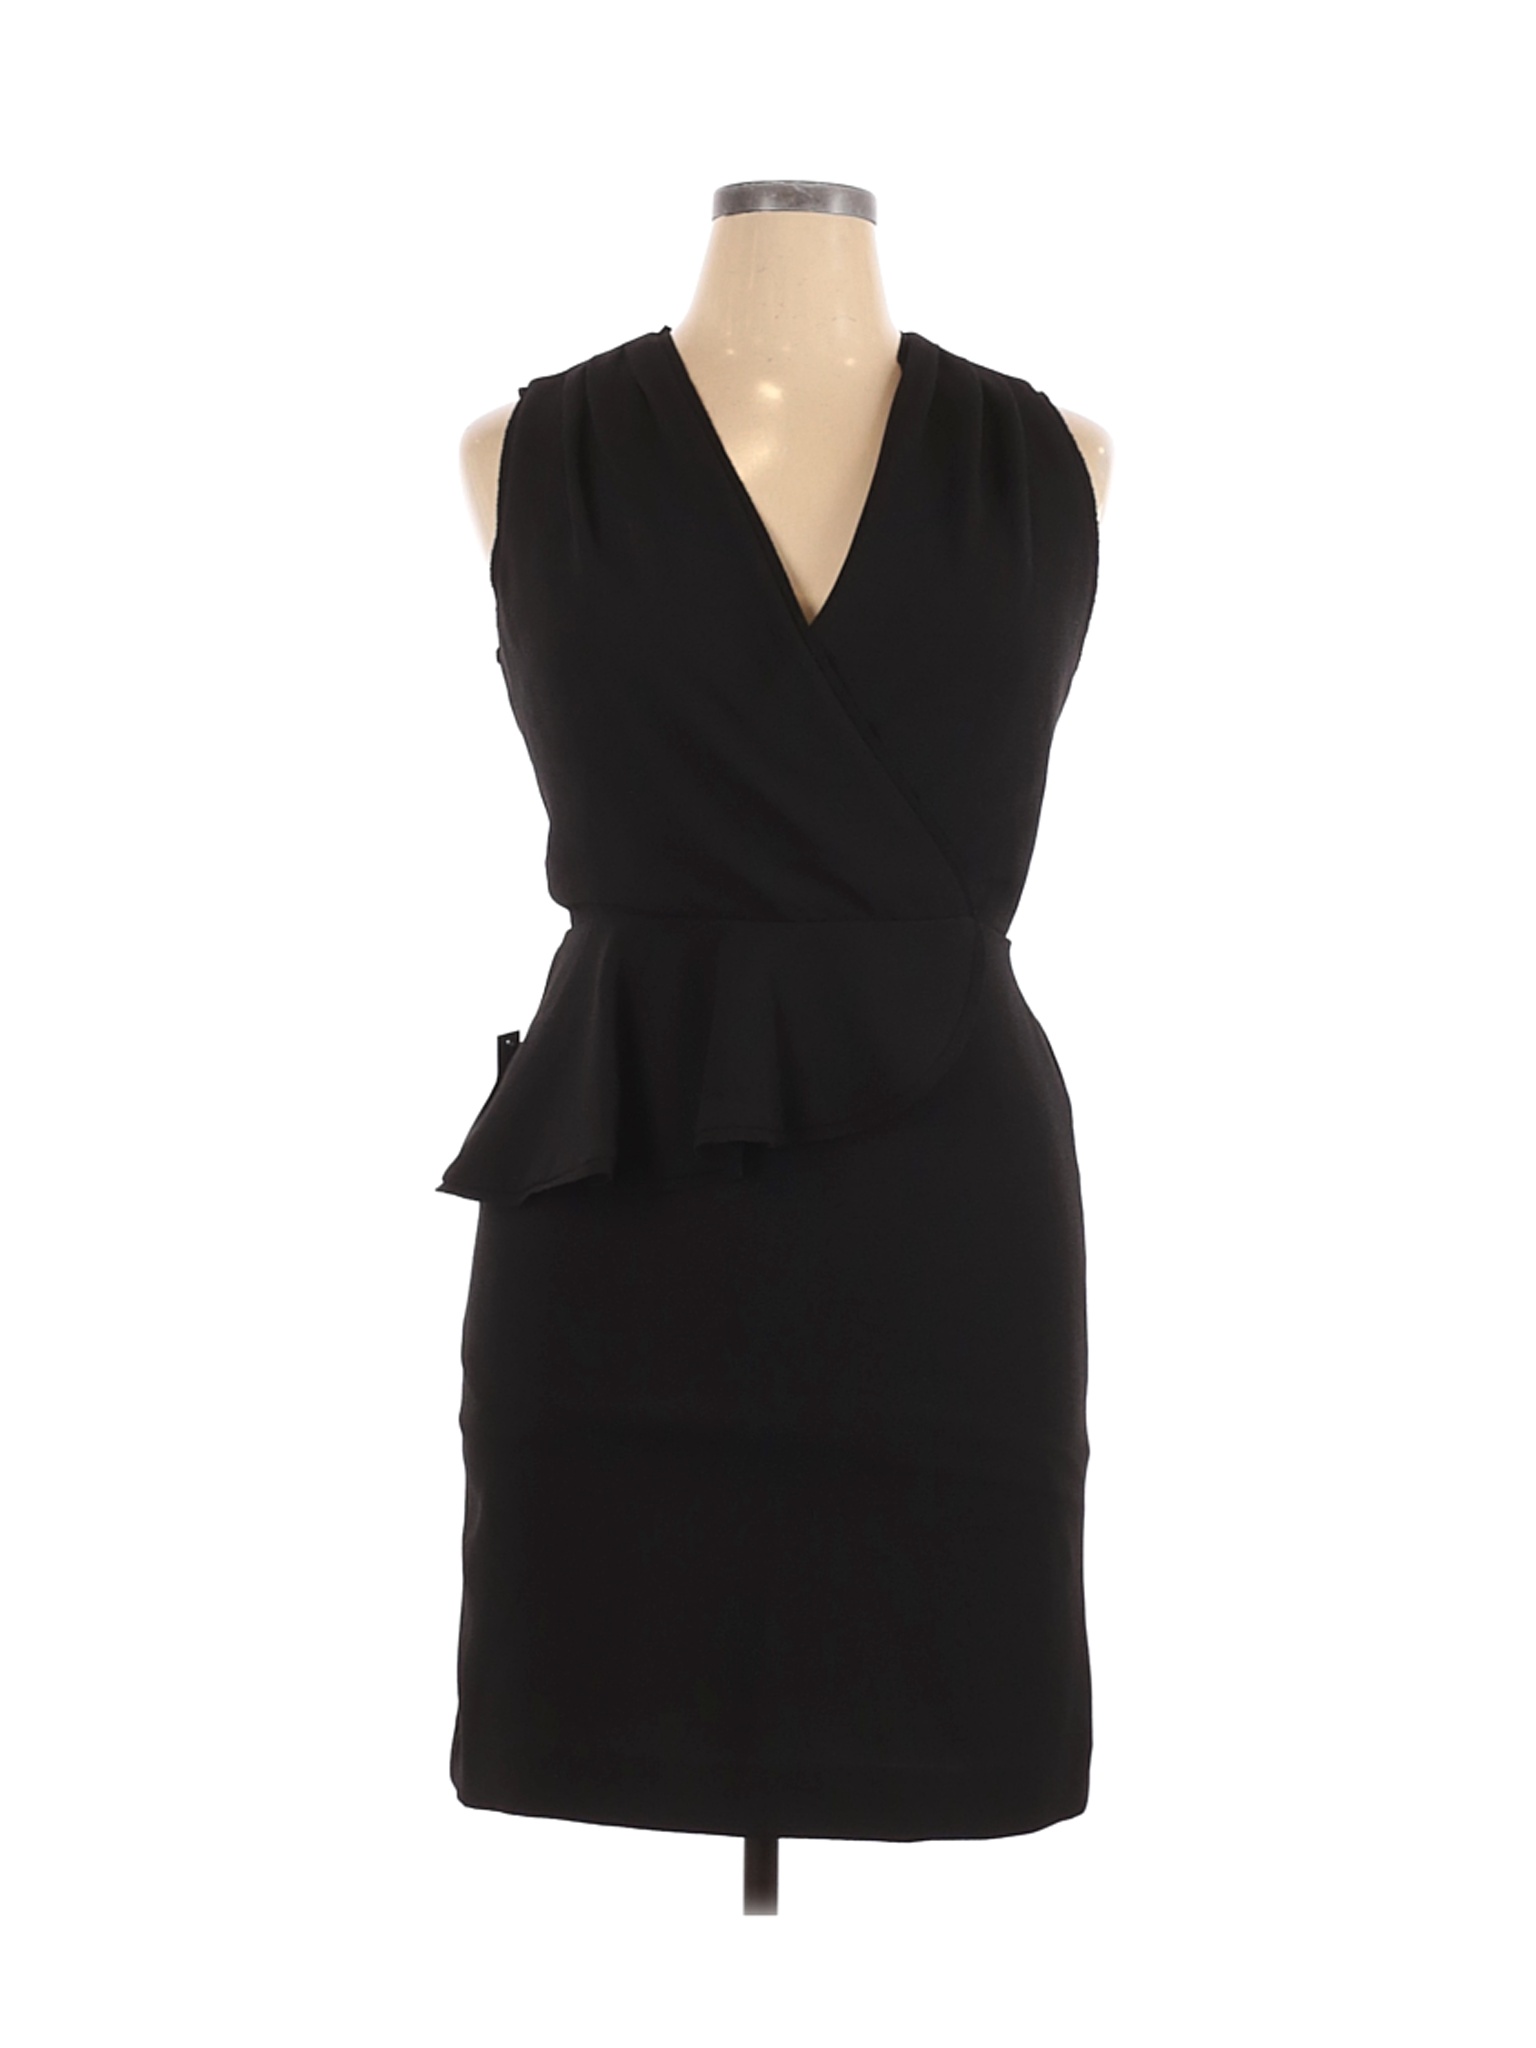 NWT The Limited Women Black Cocktail Dress 14 | eBay